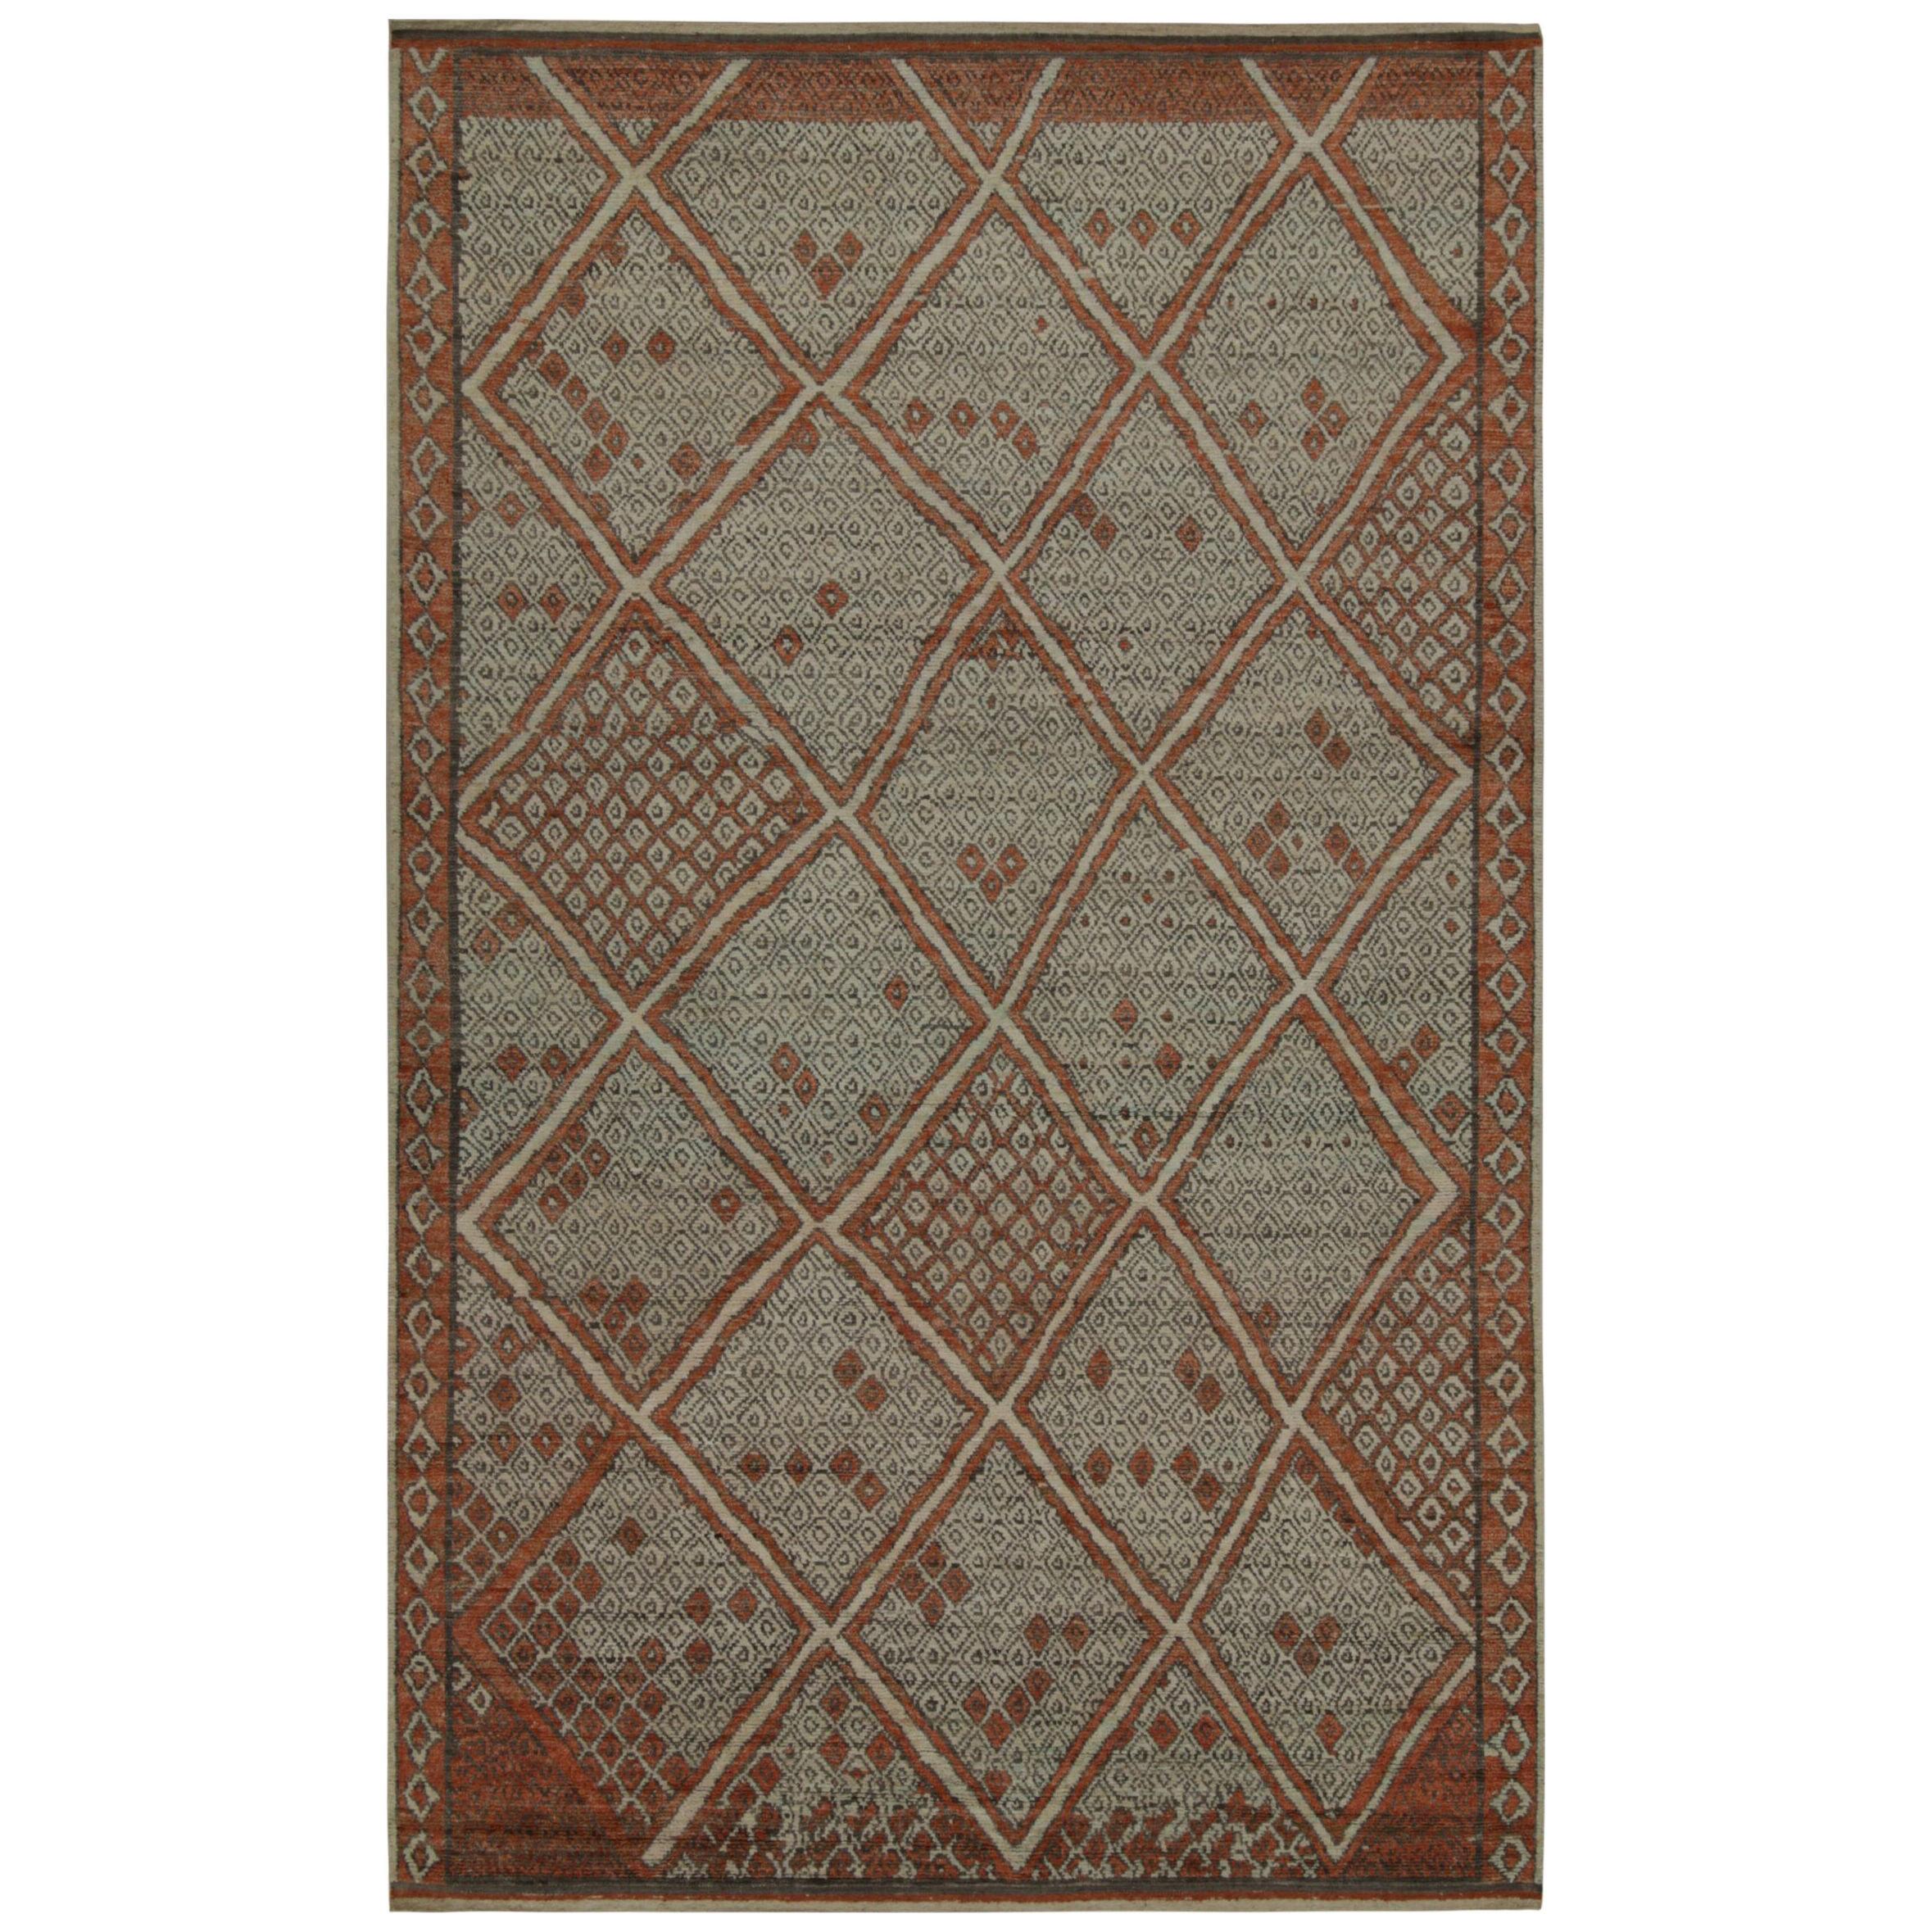 Rug & Kilim’s Moroccan Style Rug in Auburn Red and Gray Diamond Patterns